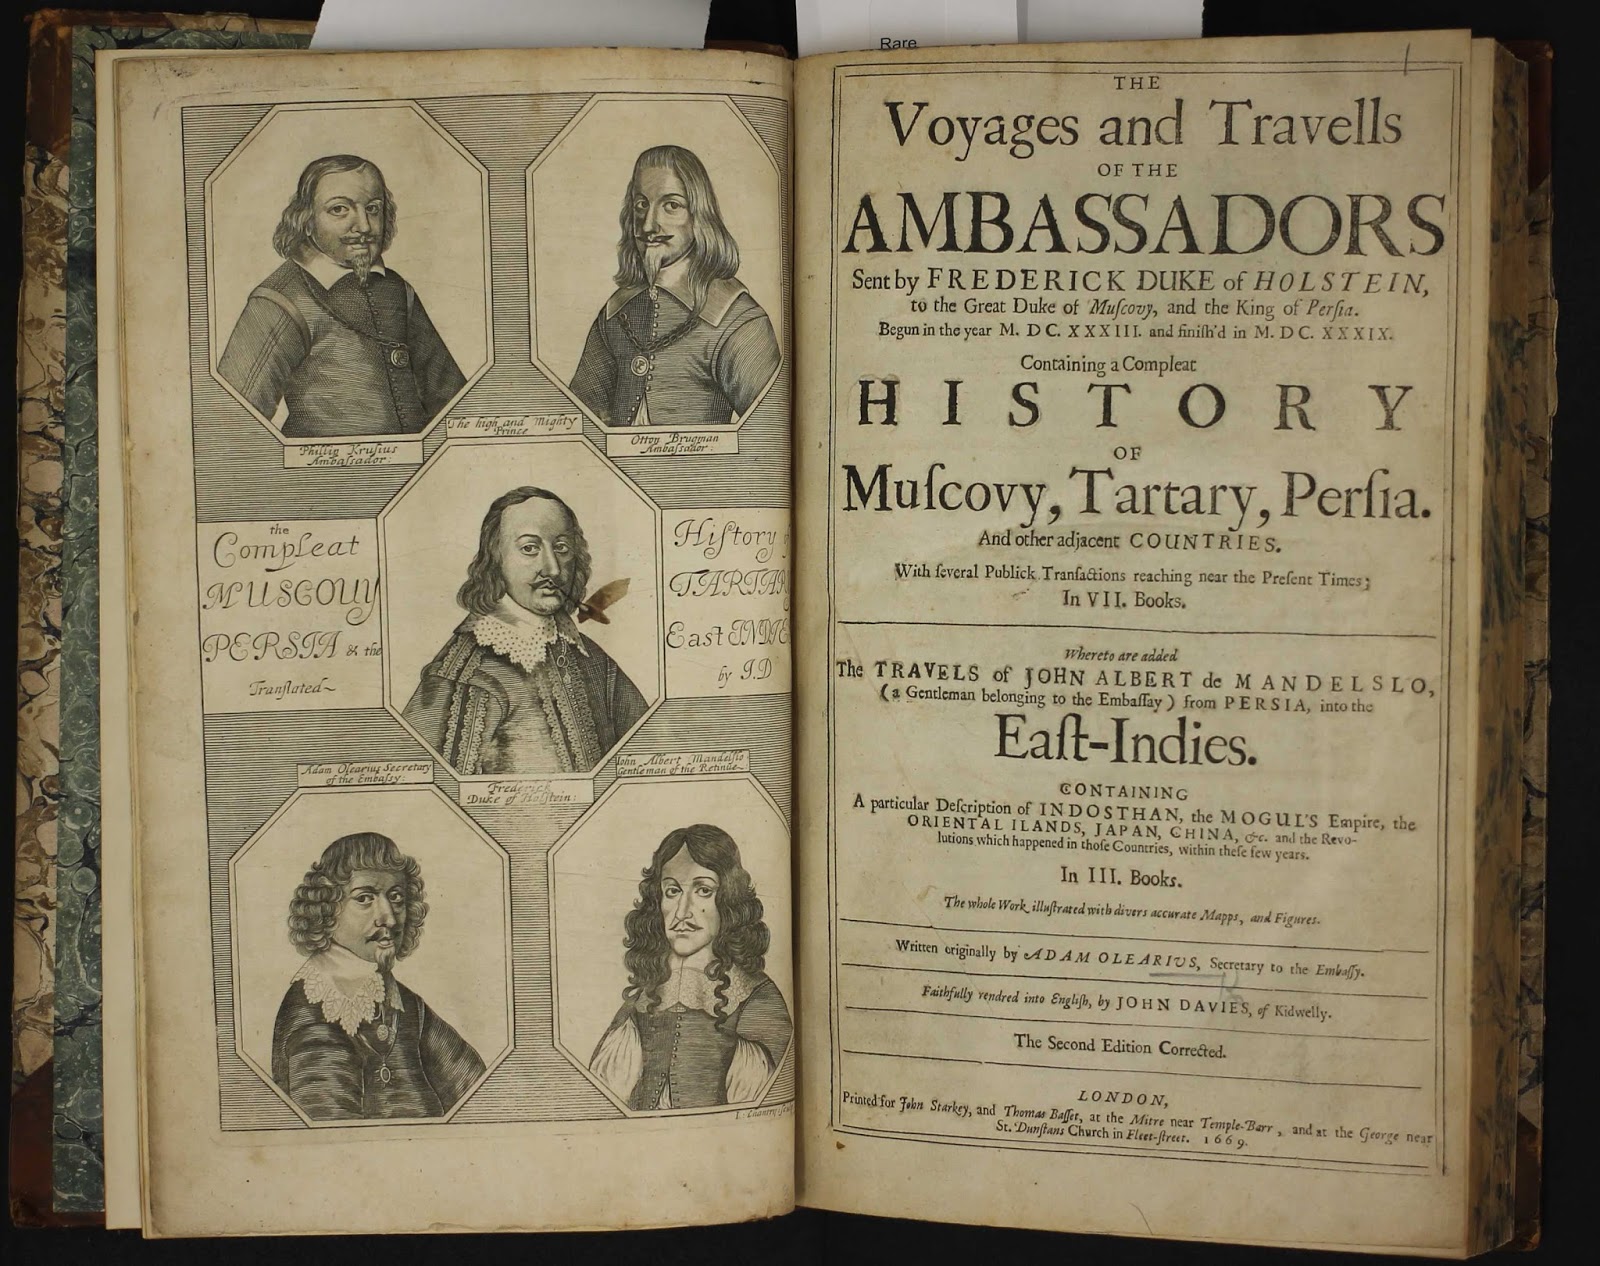 Title pageof "The Voyages and Travells of the Ambassadors. containing a compleat hisotry of Muscovy, Tartary, Persia and other adjacent countries.  With engravings of the travellers on the facing page